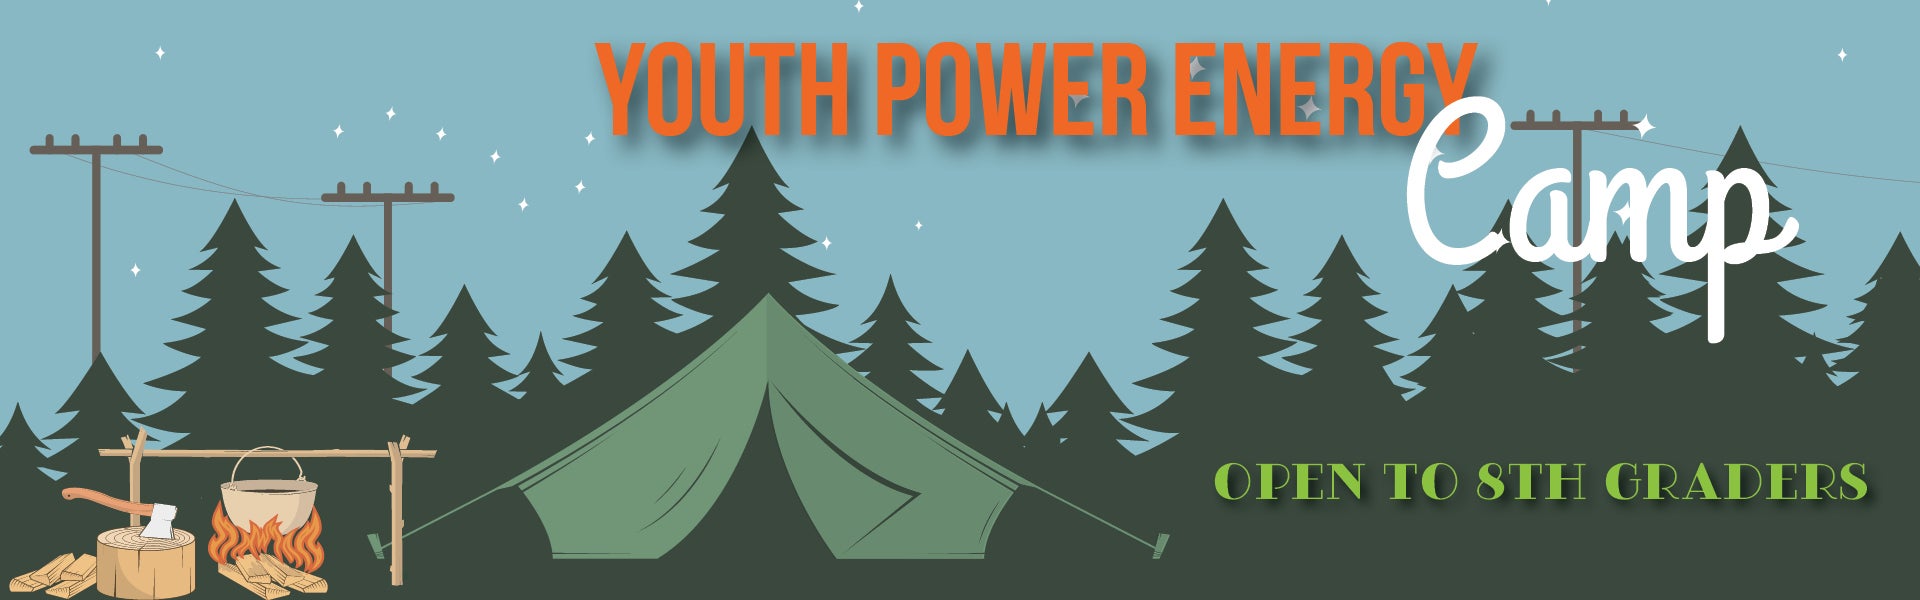 Youth Power Energy Camp open to Eight Graders open now! 